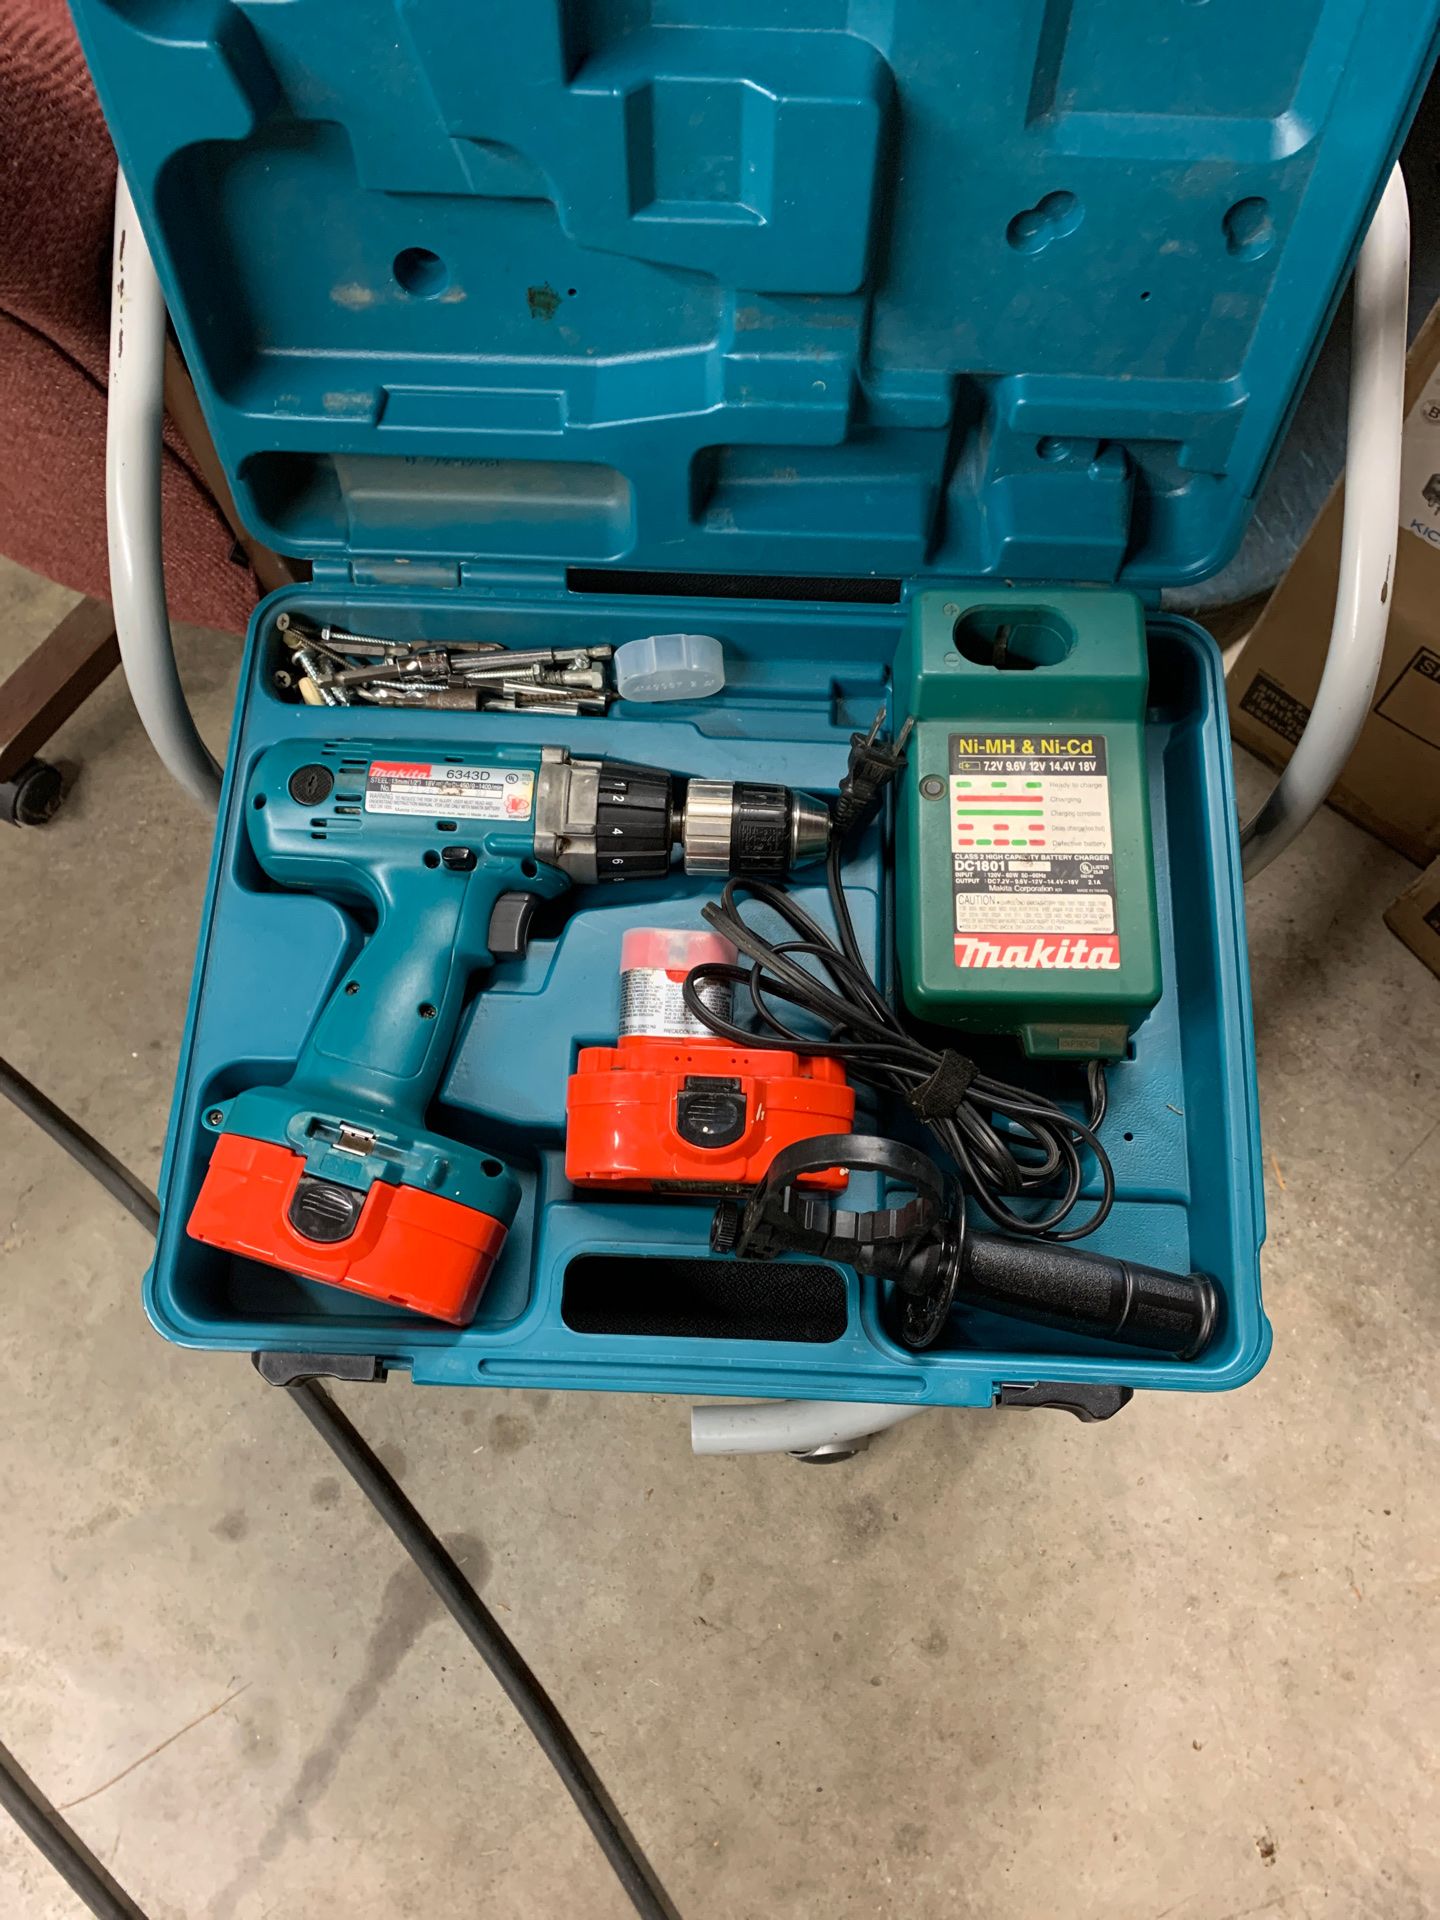 Makita 18 volt drill with 2 batteries and charger in a hard case